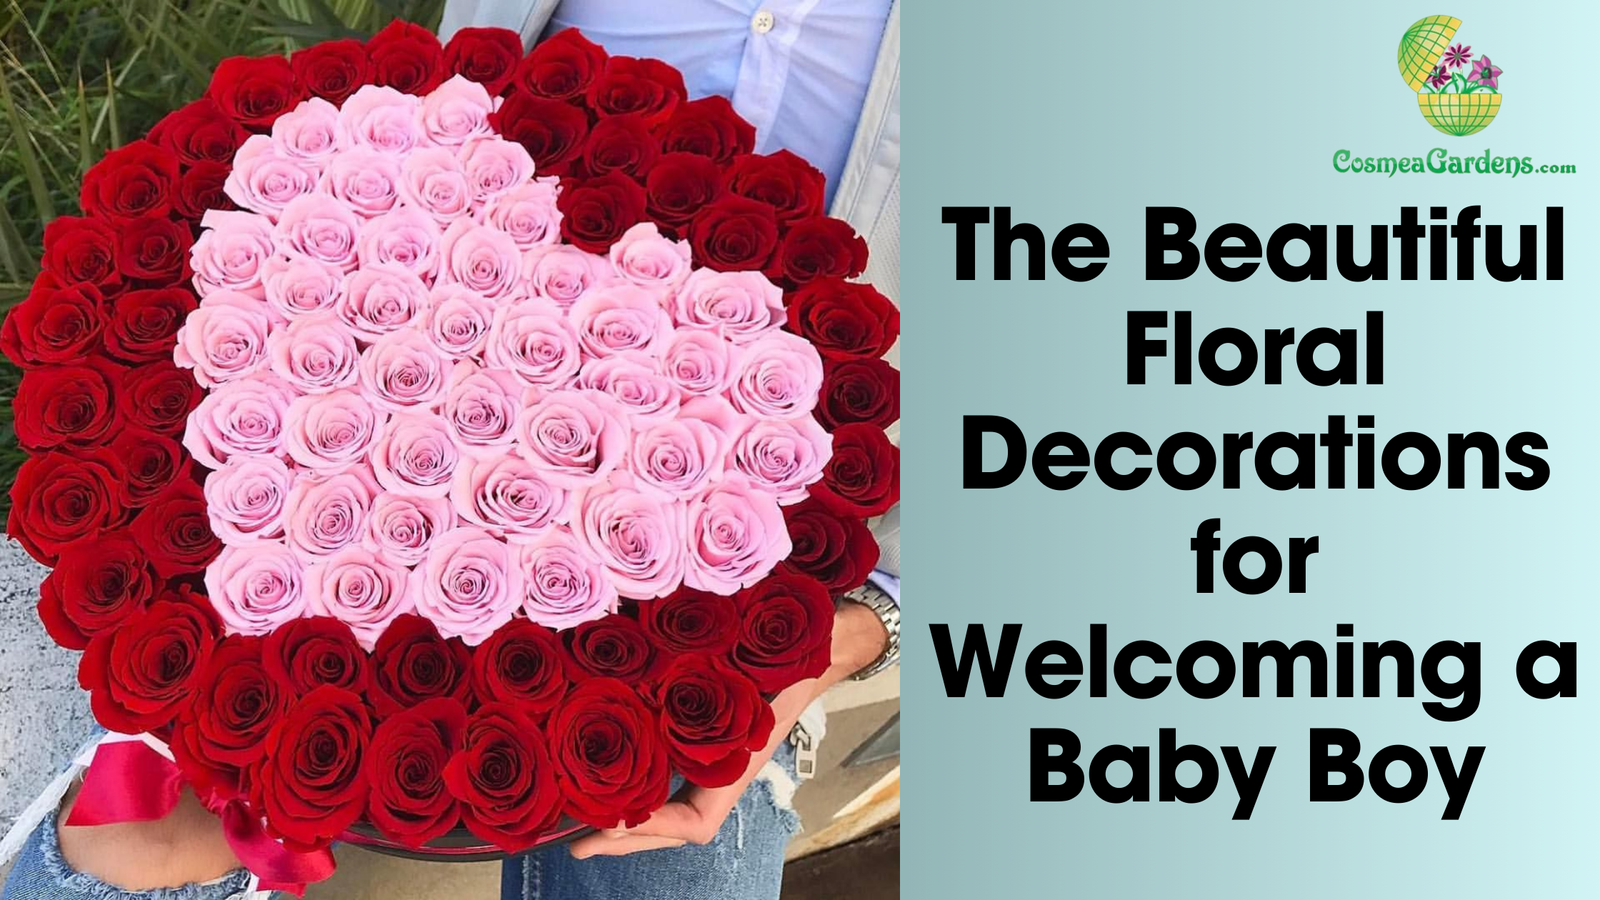 The Beautiful Floral Decorations for Welcoming a Baby Boy